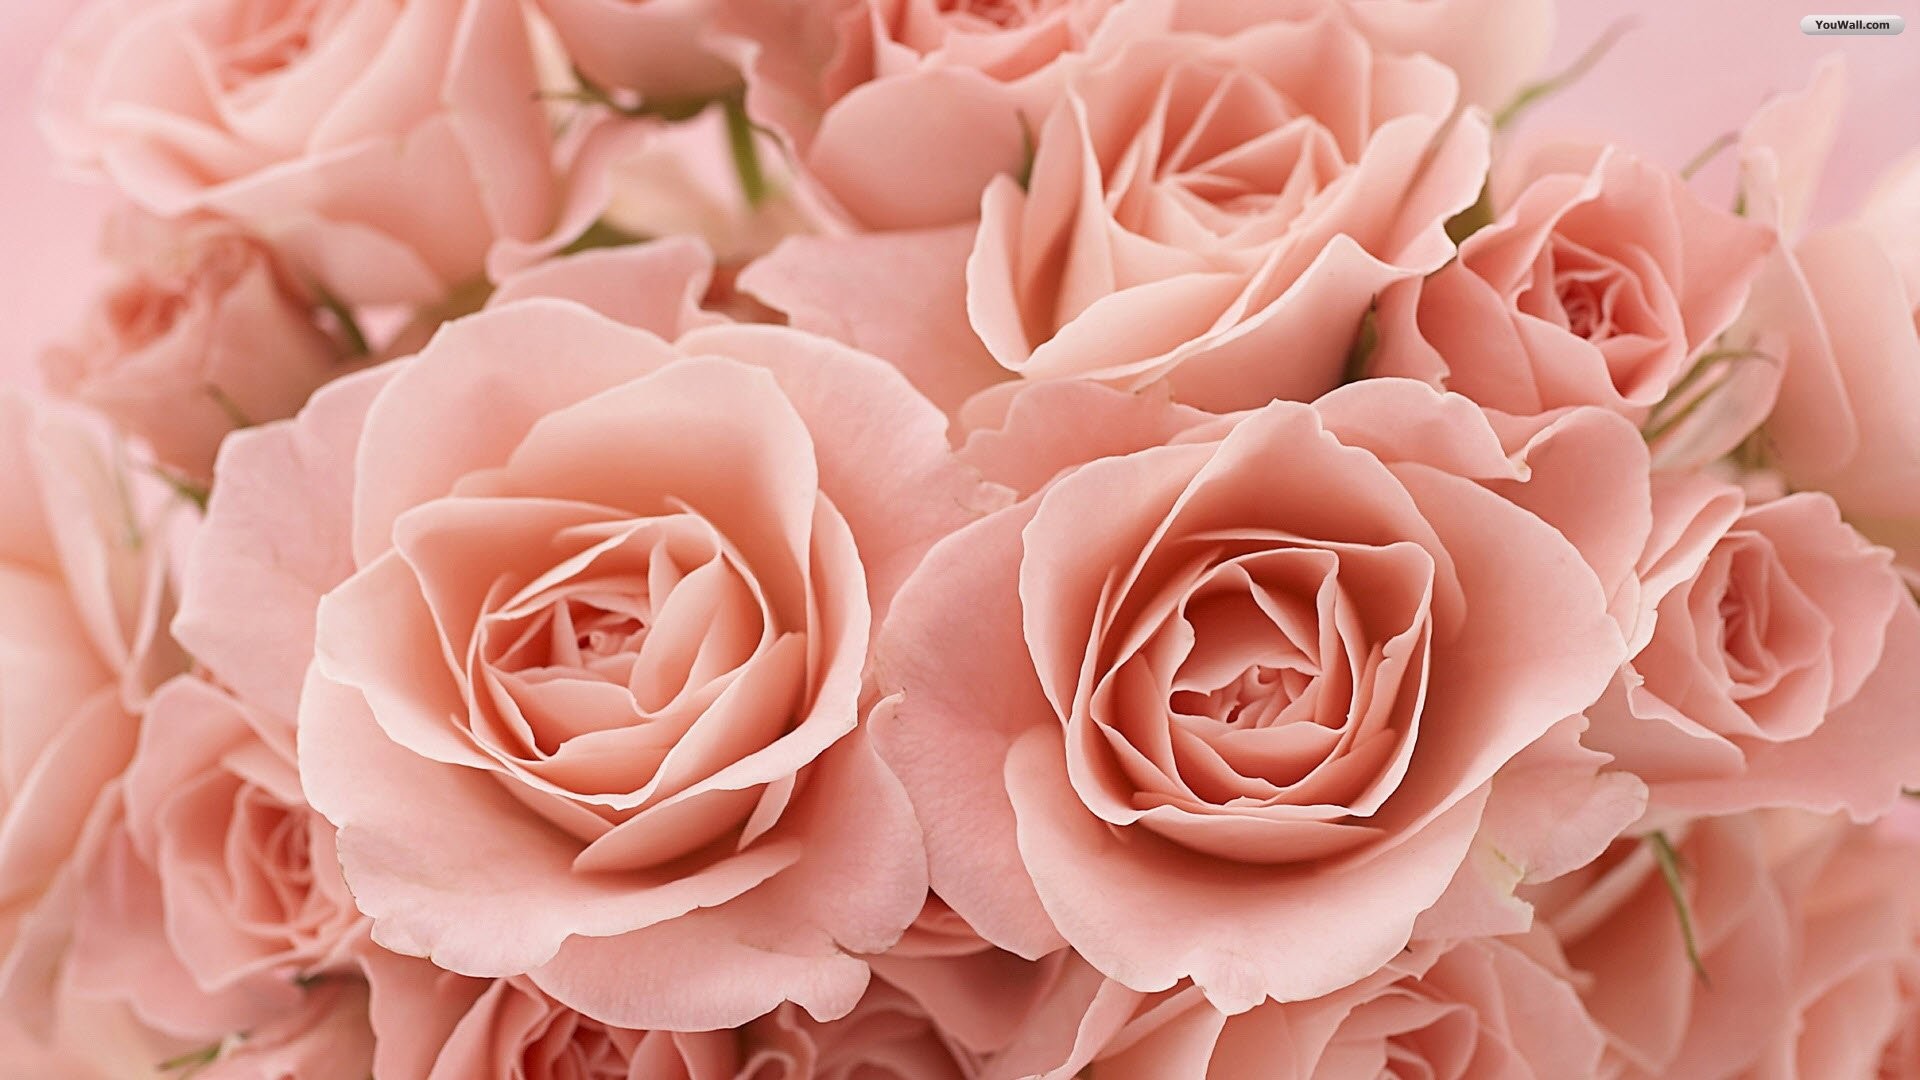 1920x1080 Collection of Roses Wallpaper on HDWallpapers